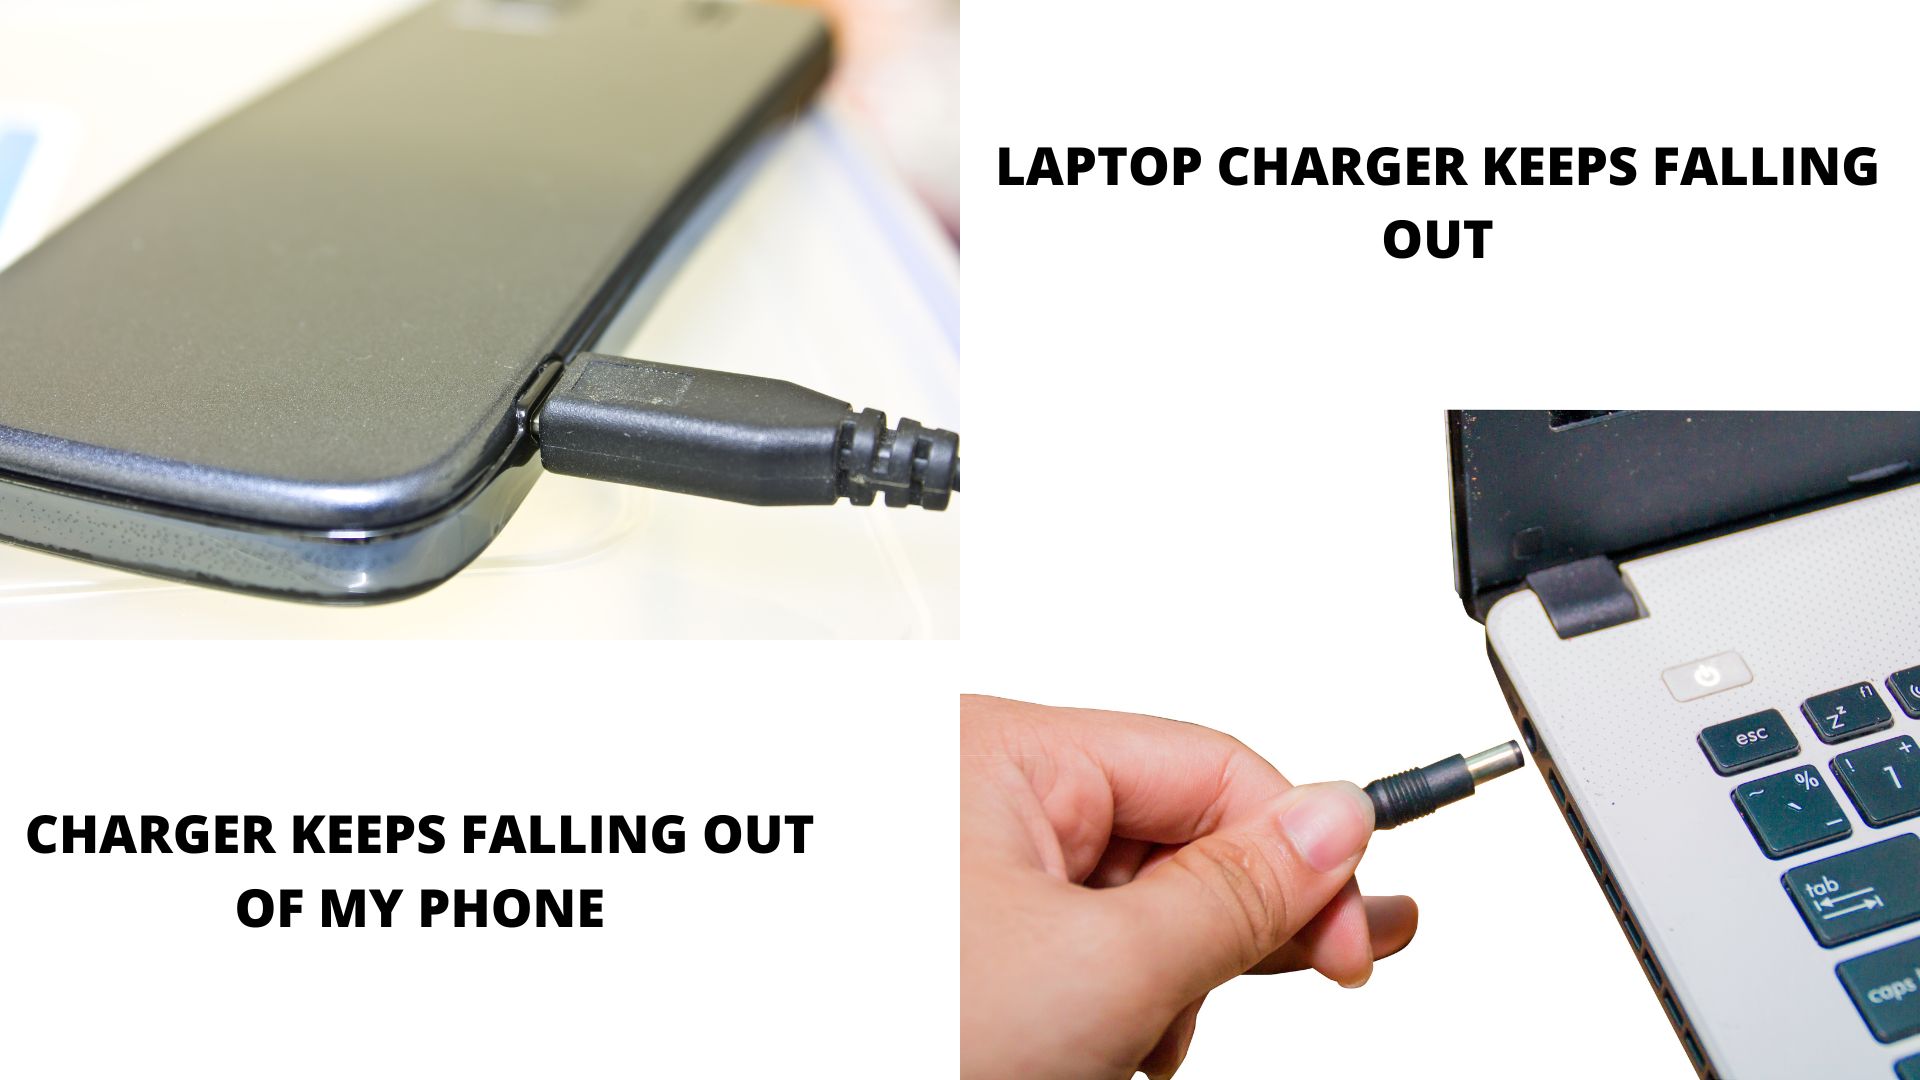 Usb, mac, iphone & laptop charger keeps falling out